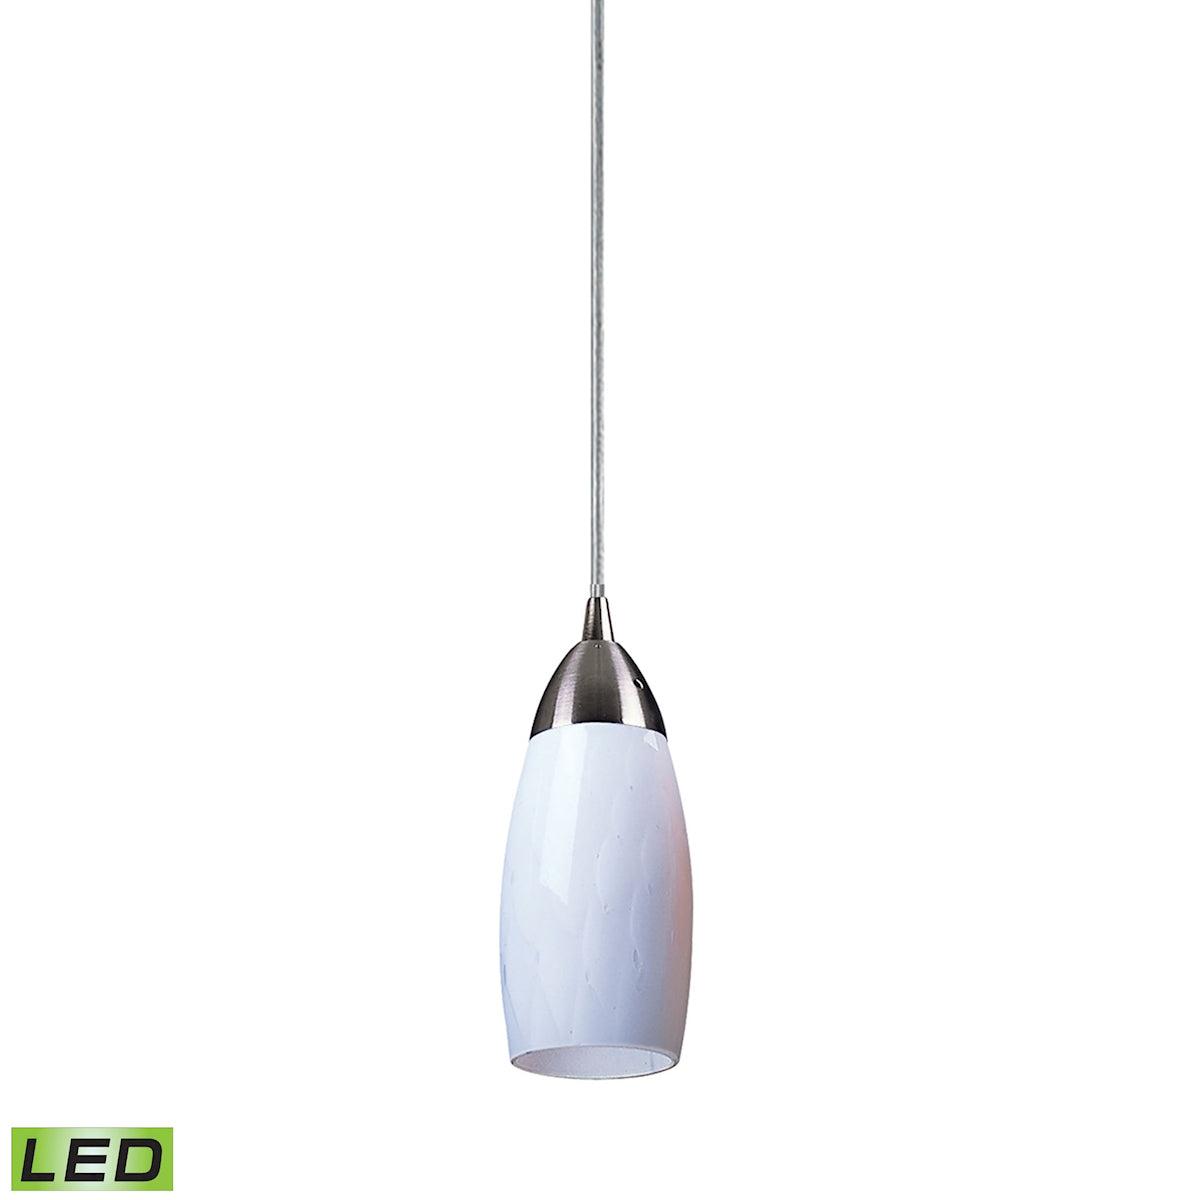 ELK Lighting 110-1WH-LED Milan 1-Light Mini Pendant in Satin Nickel with Simple White Glass - Includes LED Bulb